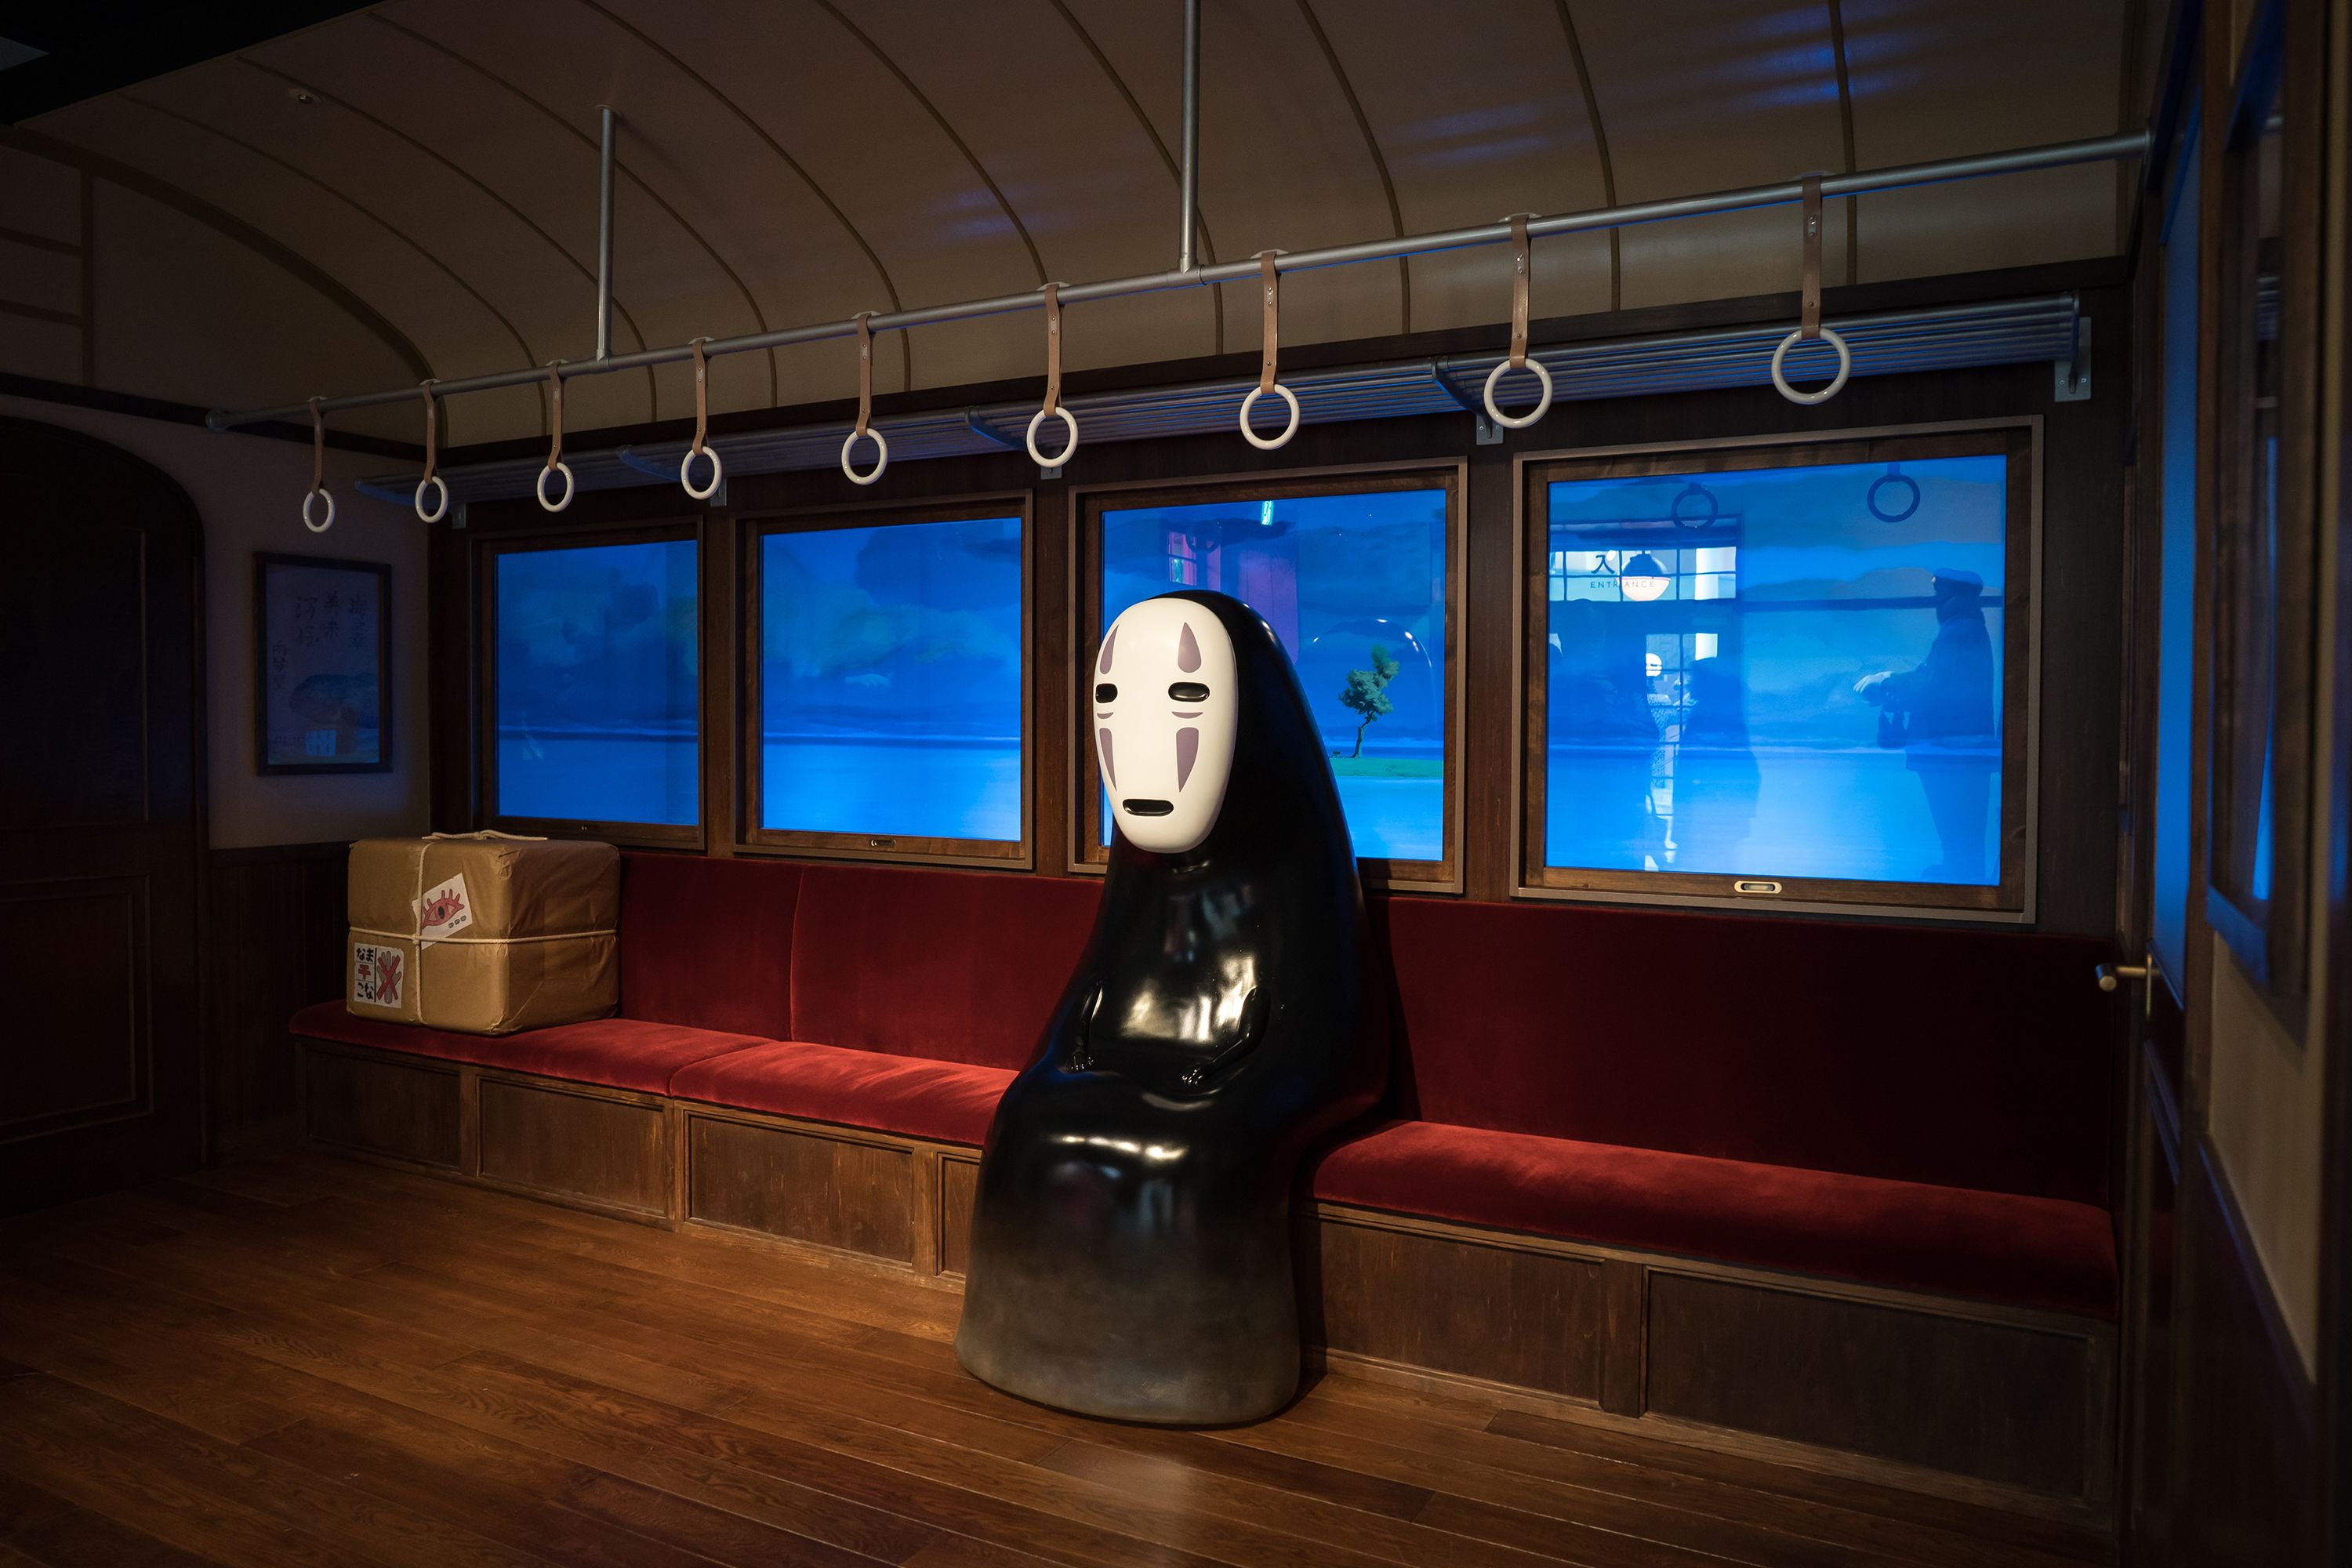 A display of Kaonashi or No-Face, an animation character from the film 'Spirited Away', that is copyrighted by Studio Ghibli, is seen in the Ghibli's Grand Warehouse area during a preview for the Ghibli Park on October 12, 2022 in Nagakute, Japan. The theme park, which features Studio Ghibli animations, opens on November 1 in the Expo 2005 Aichi Commemorative Park.